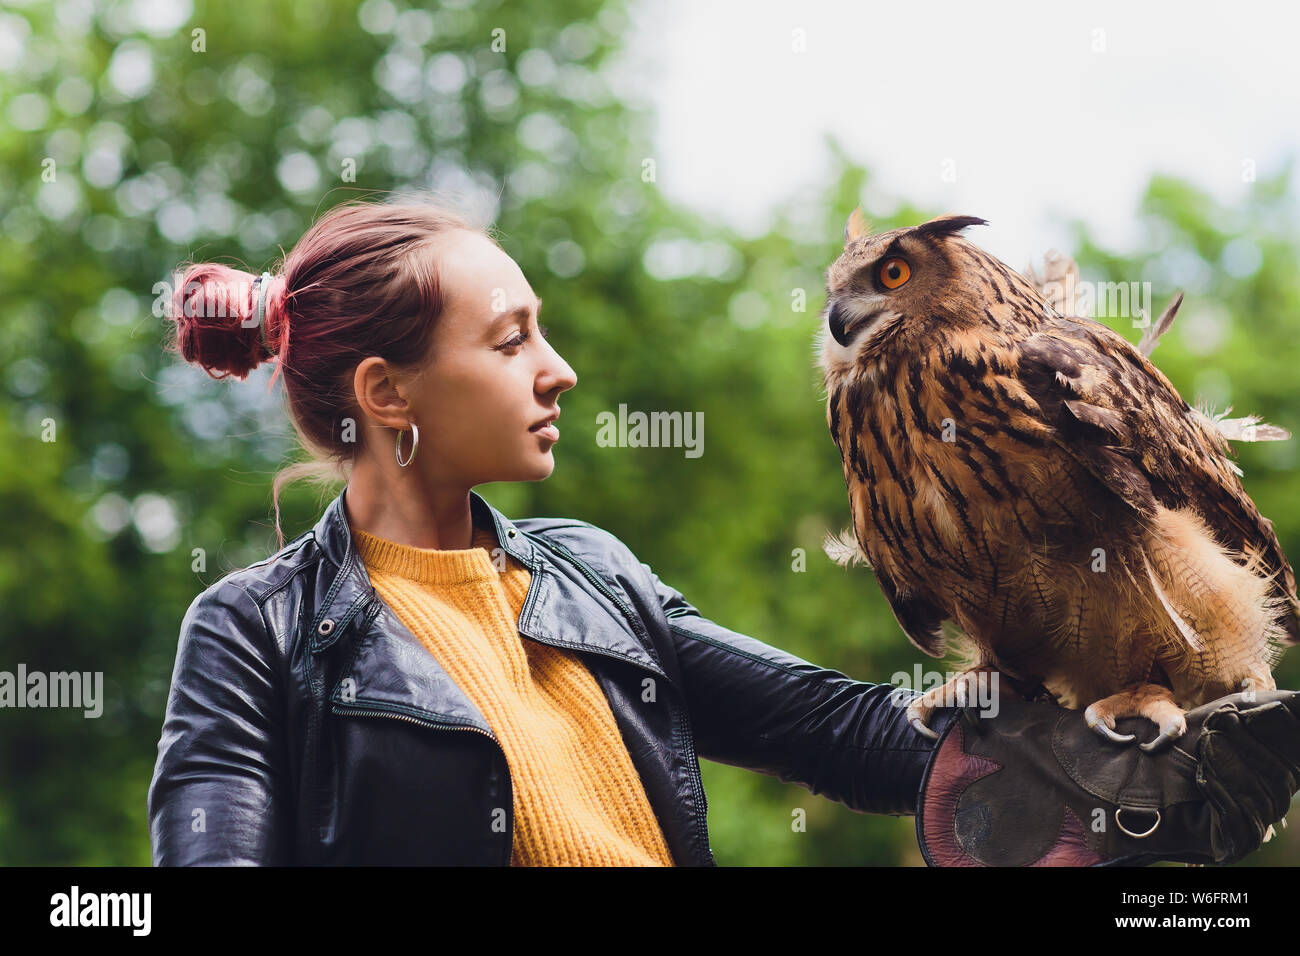 The owl sits on the girl's hand. The woman with the owl. Stock Photo